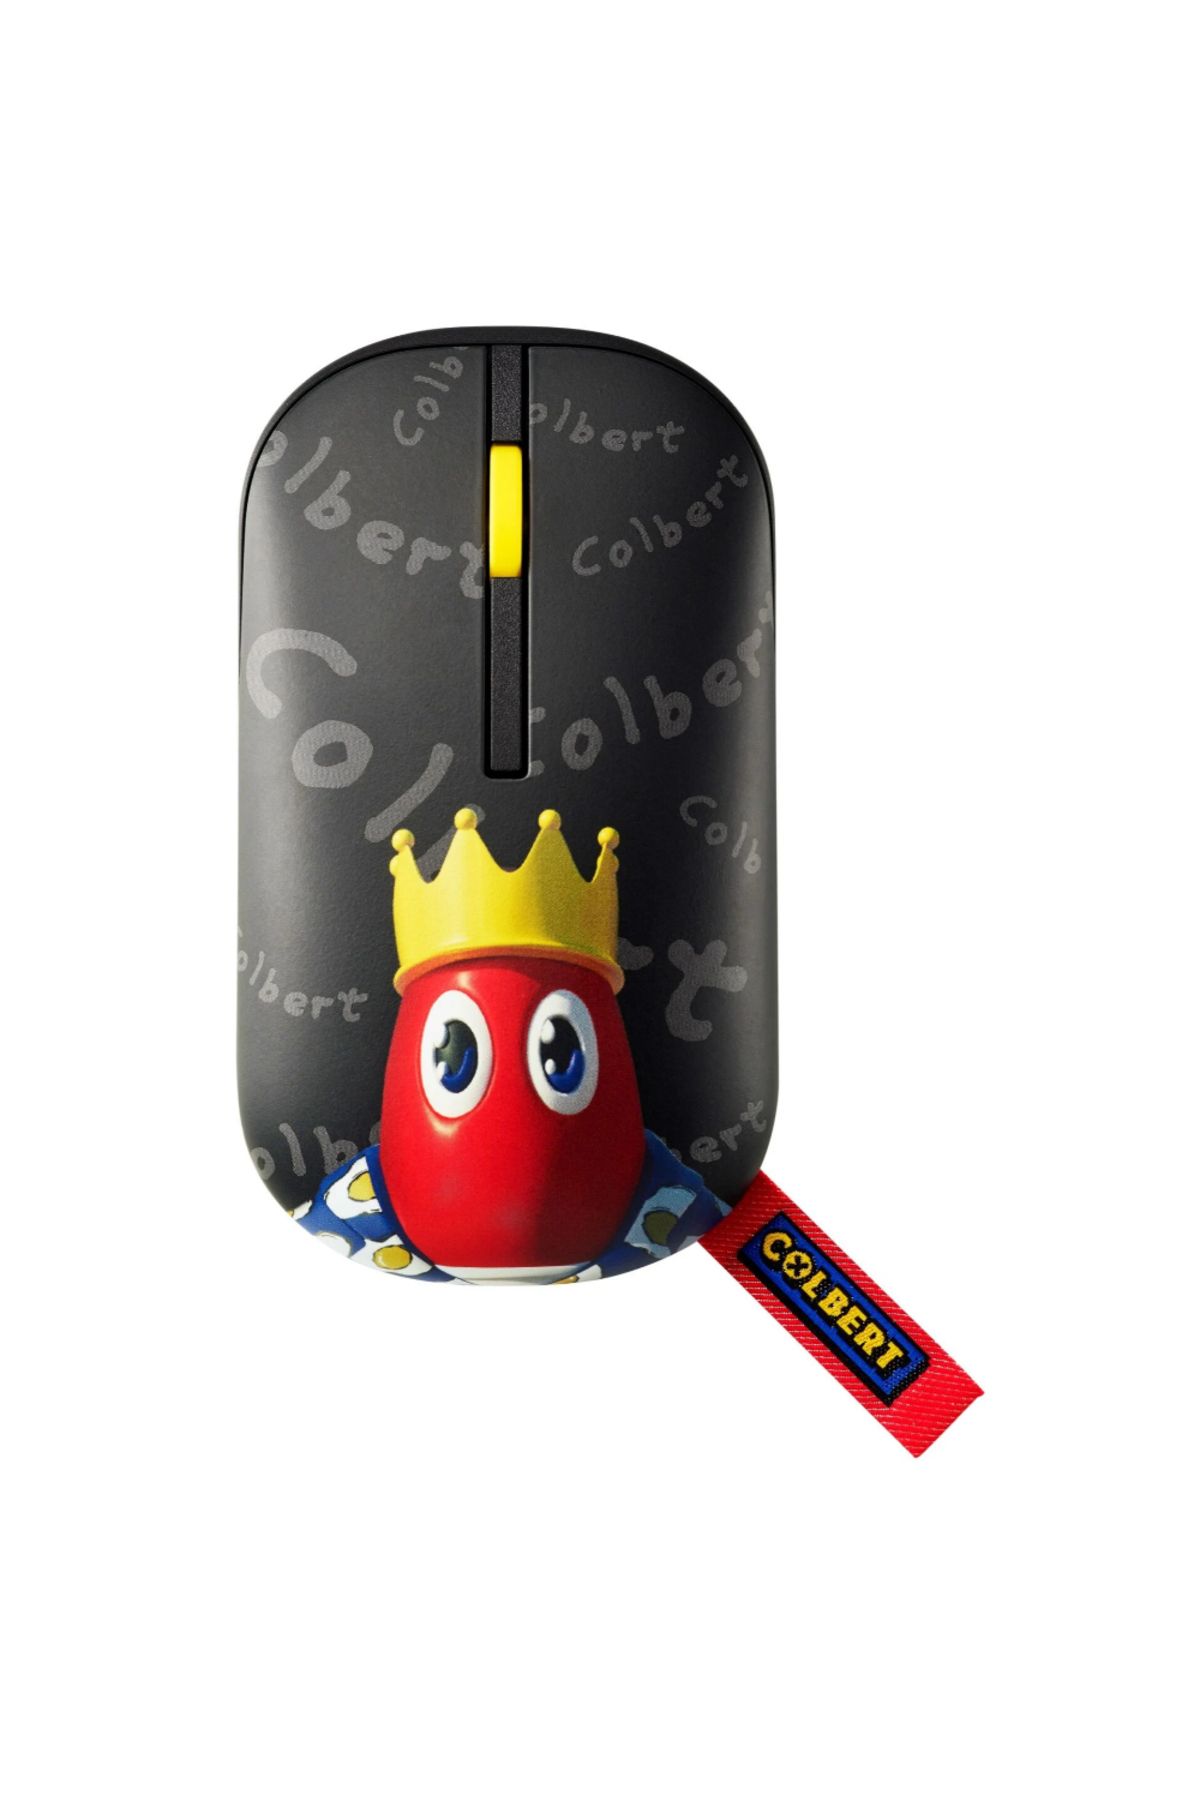 ASUS Marshmallow MD100 Kablosuz Bluetooth Mouse Philip Colbert Edition 90XB07A0-BMU080